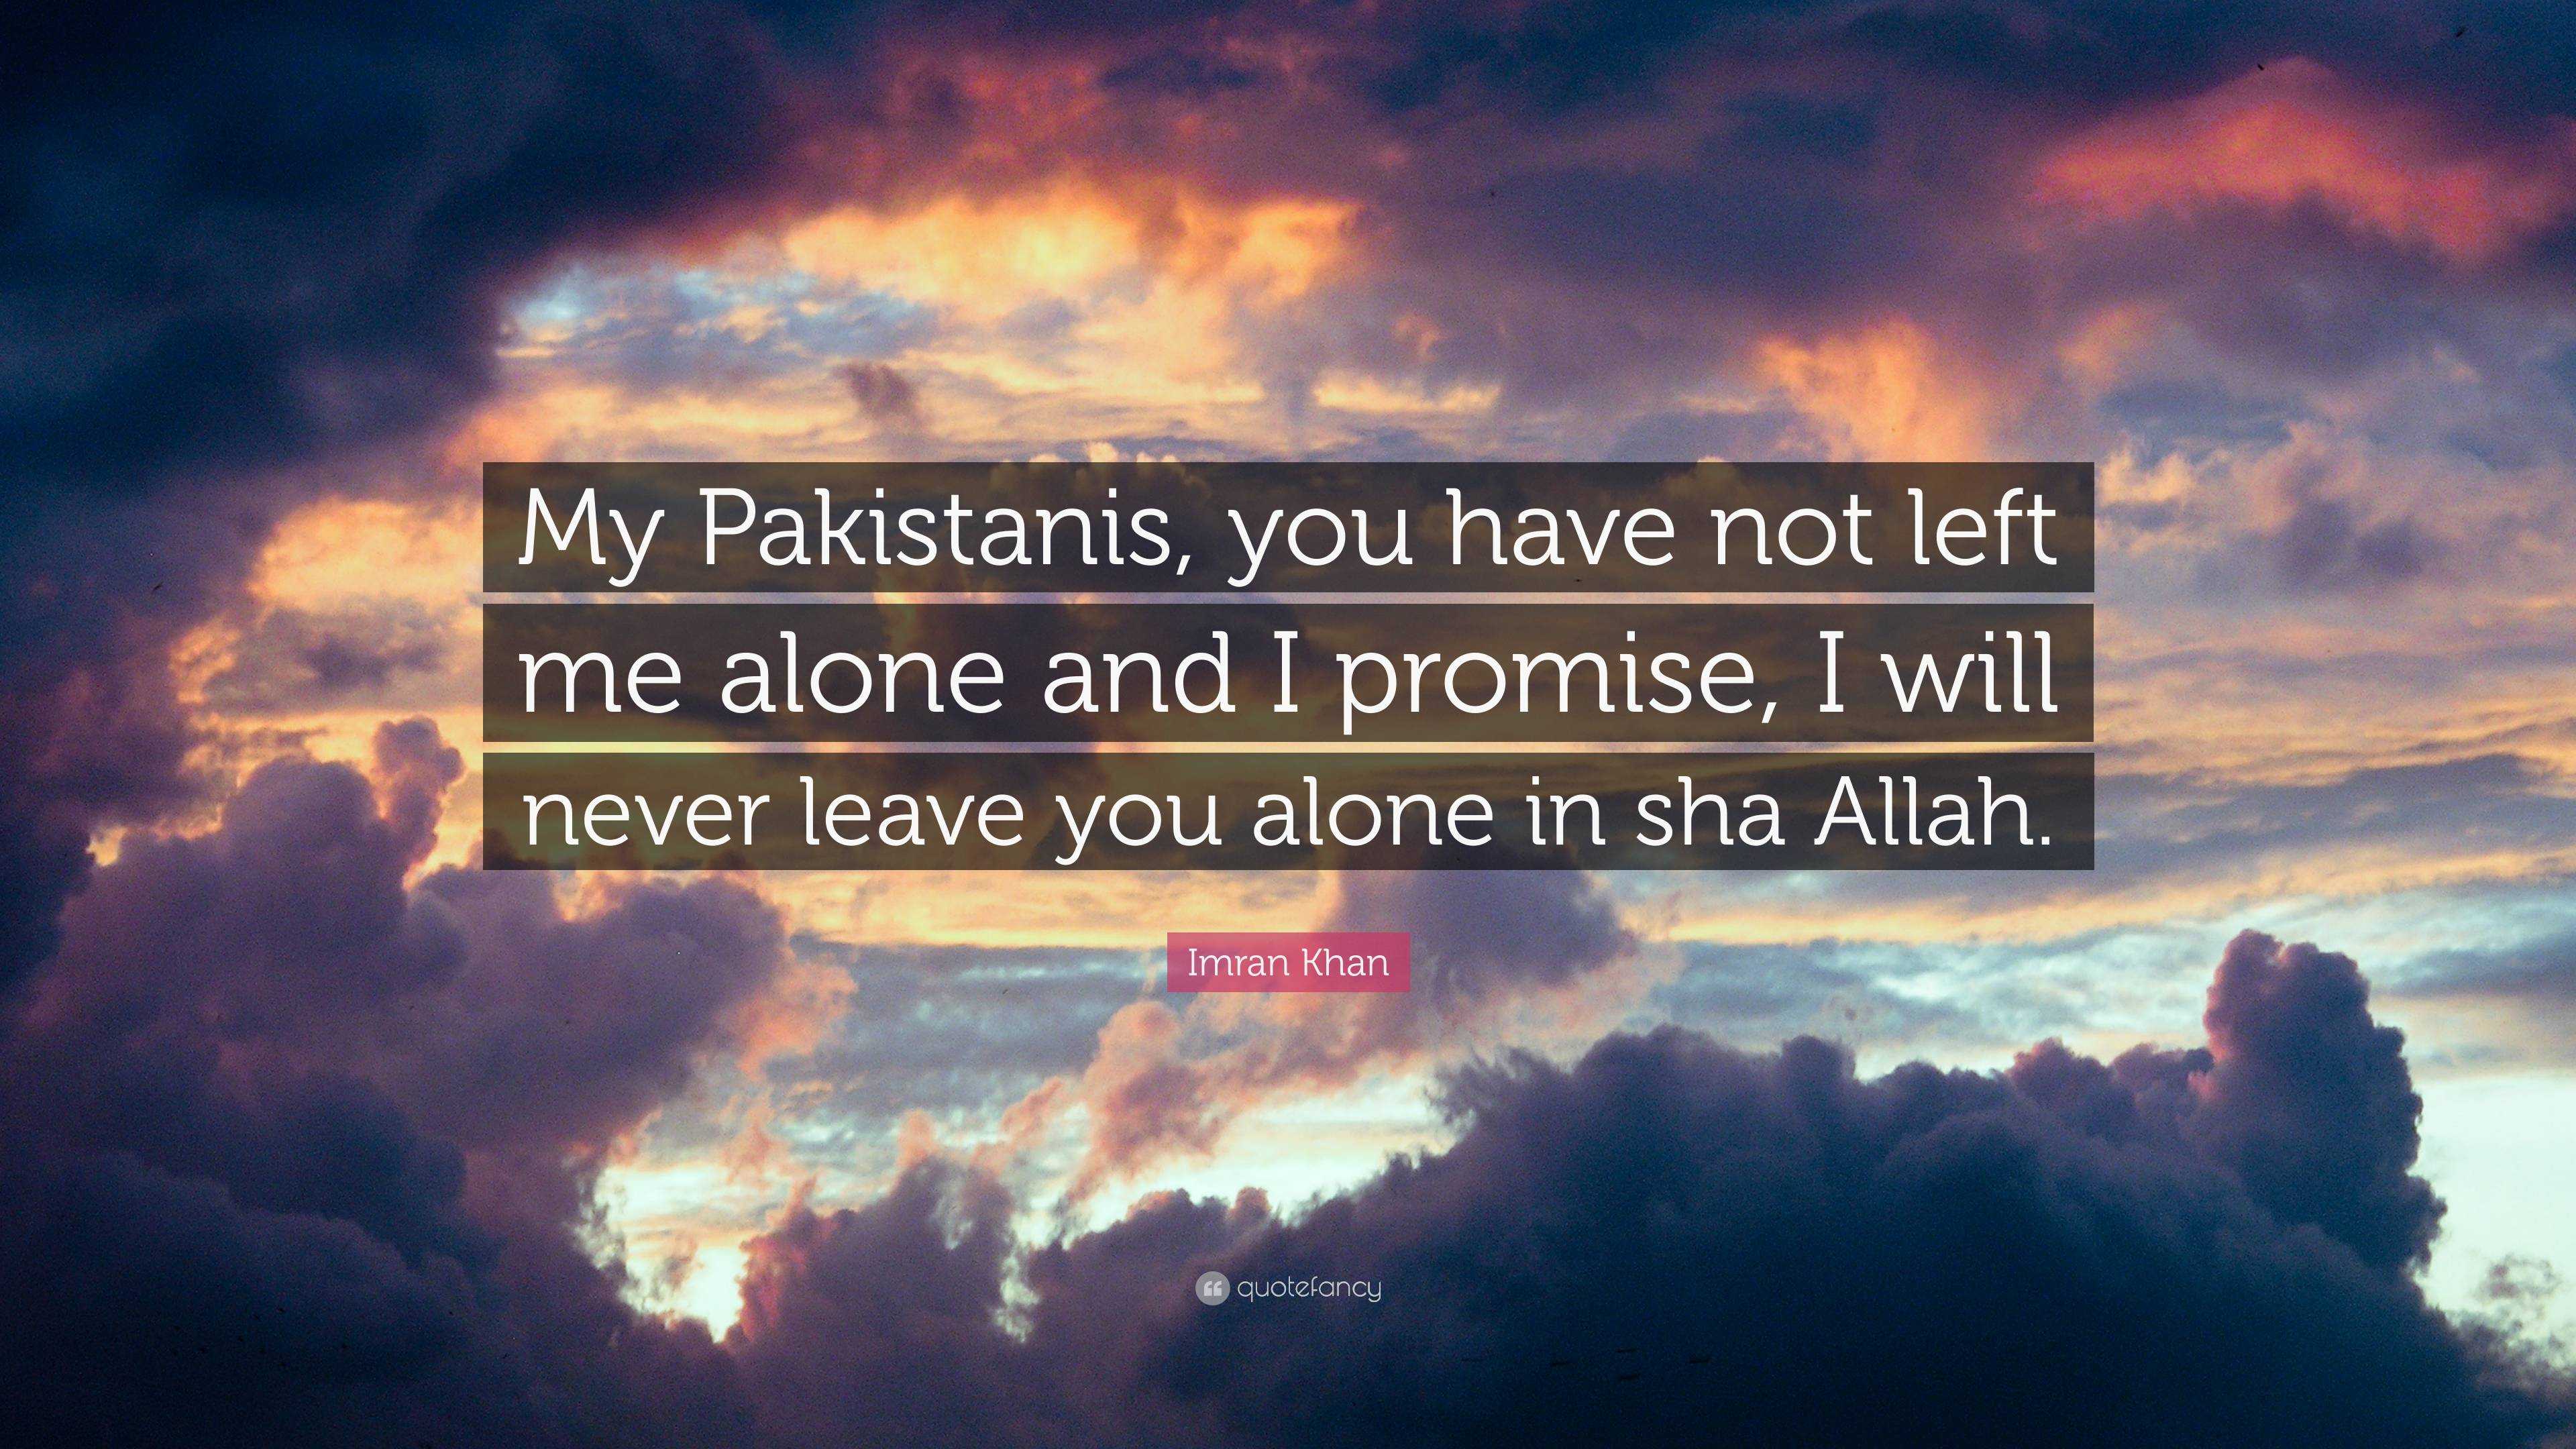 Imran Khan Quote: “My Pakistanis, you have not left me alone and I promise,  I will